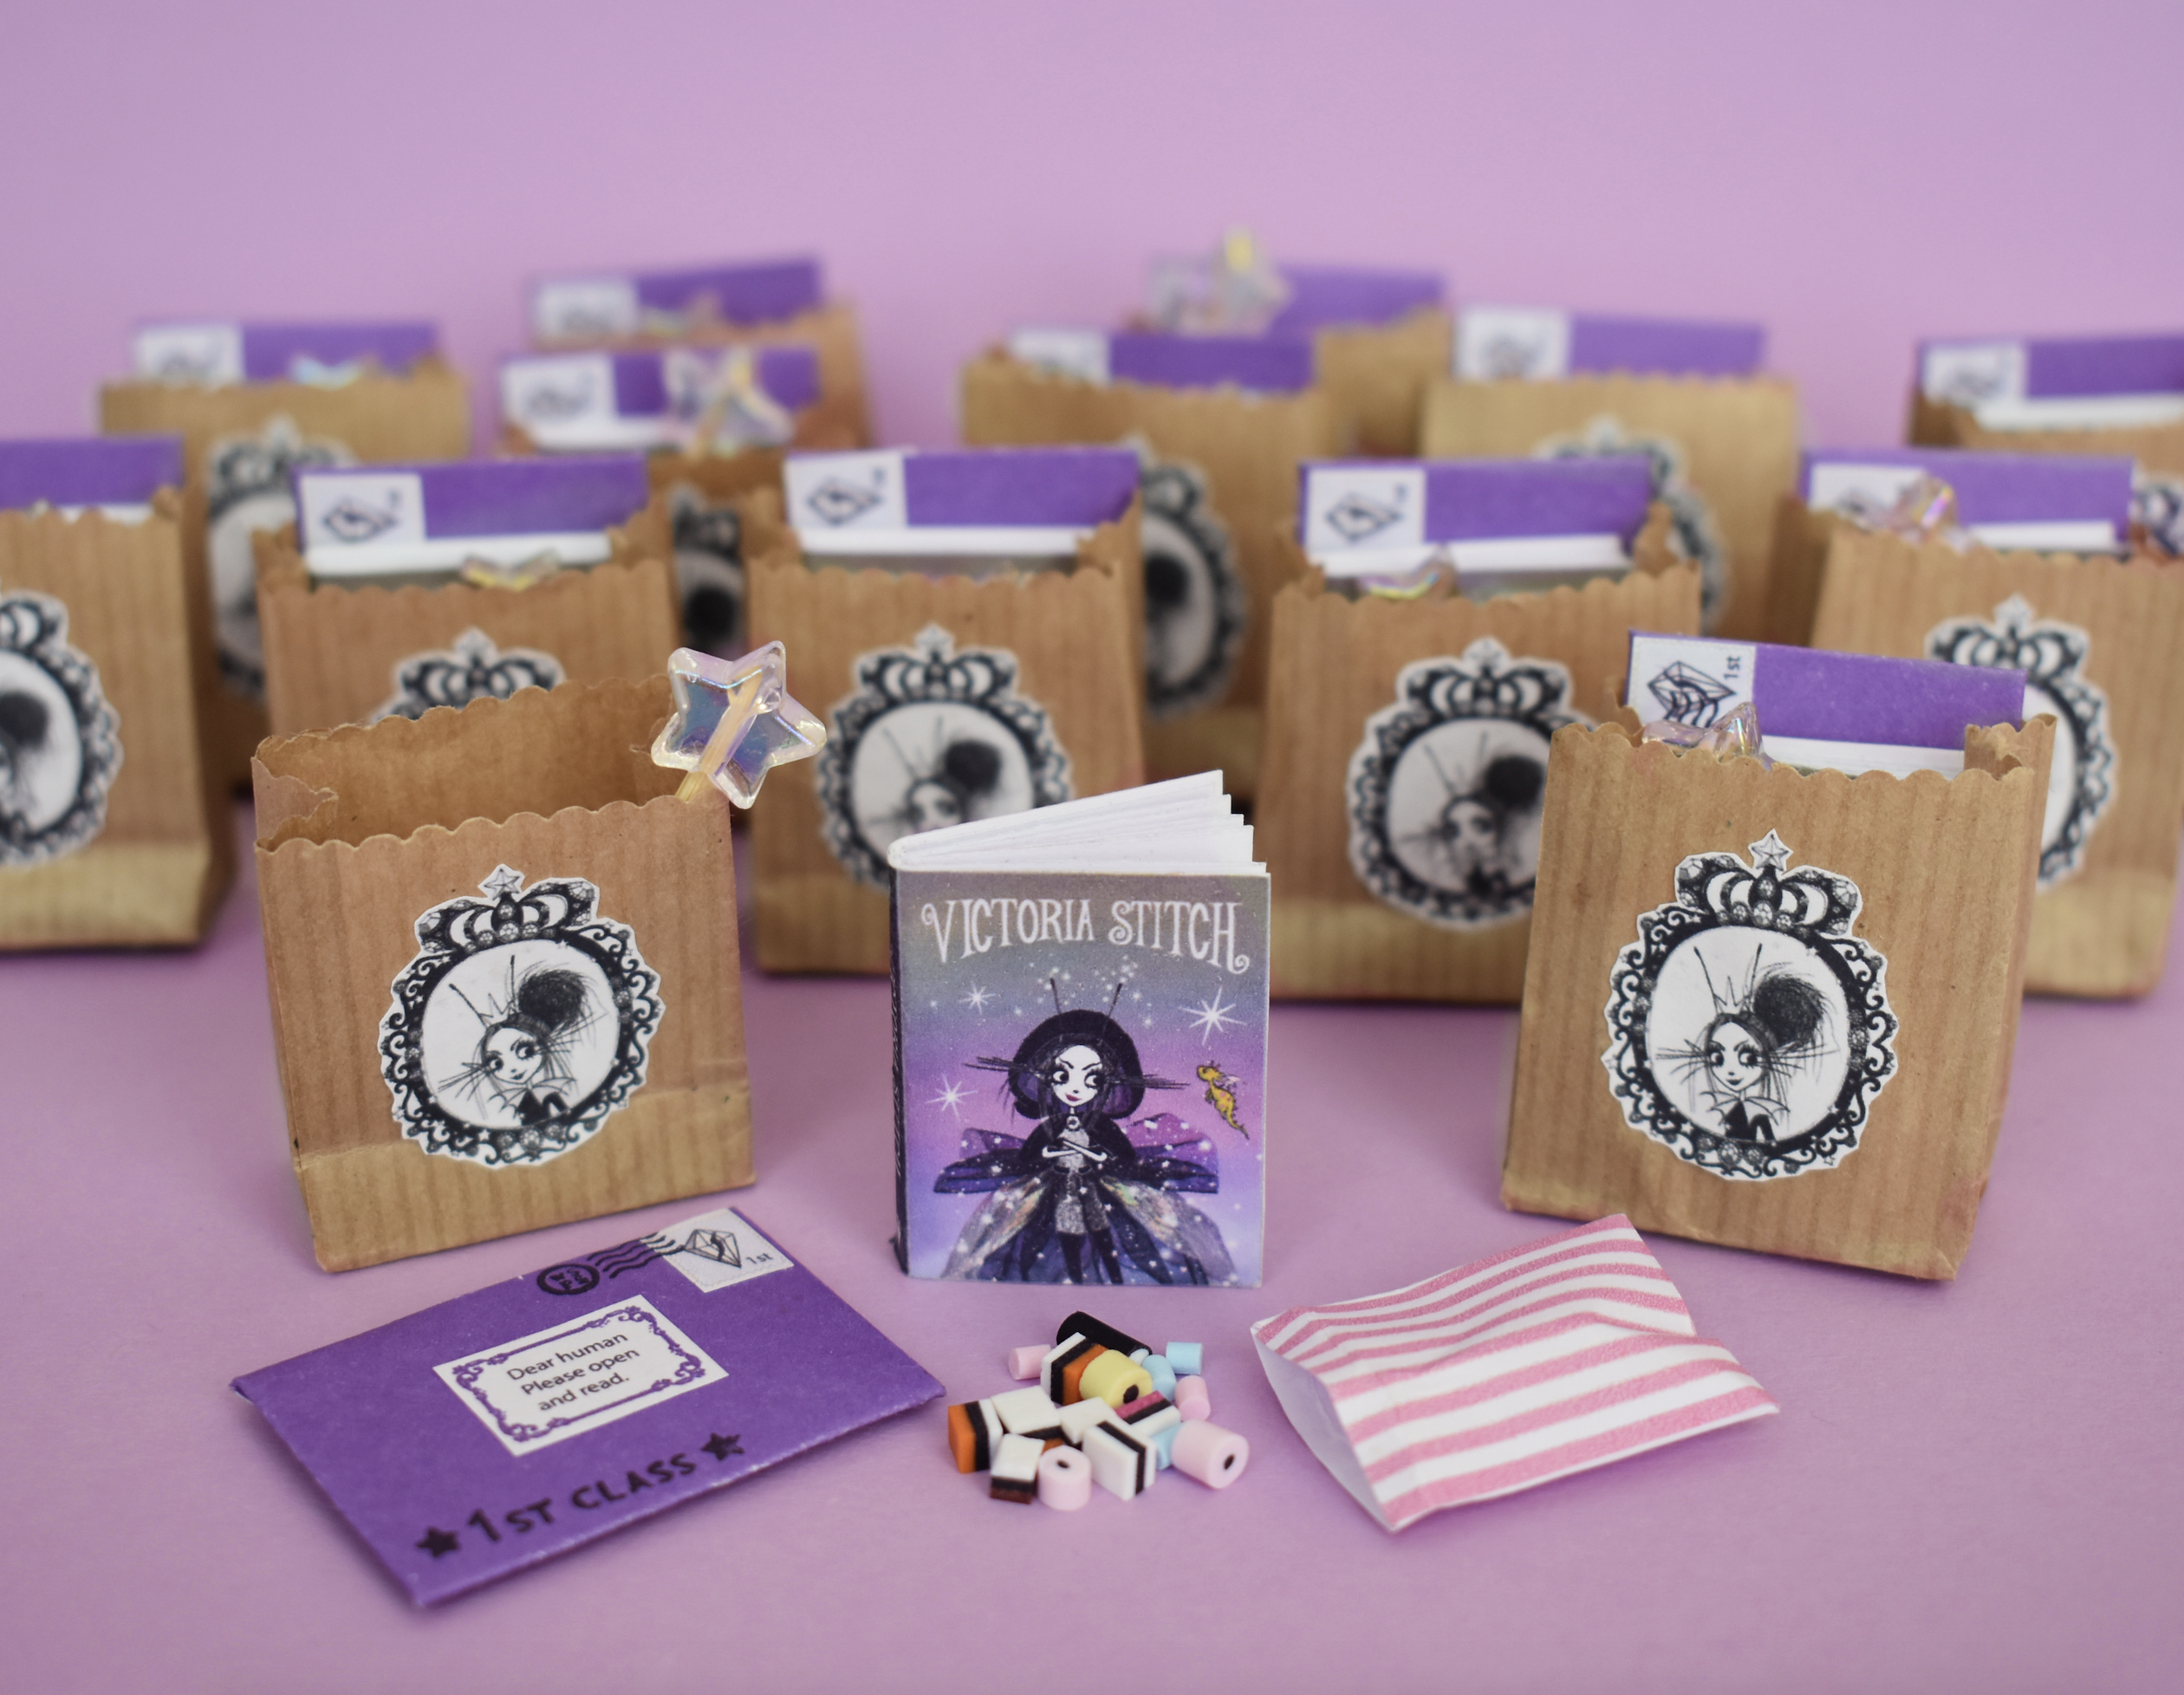 miniature Victoria Stitch Bad and Glittering goody bags Harriet Muncaster